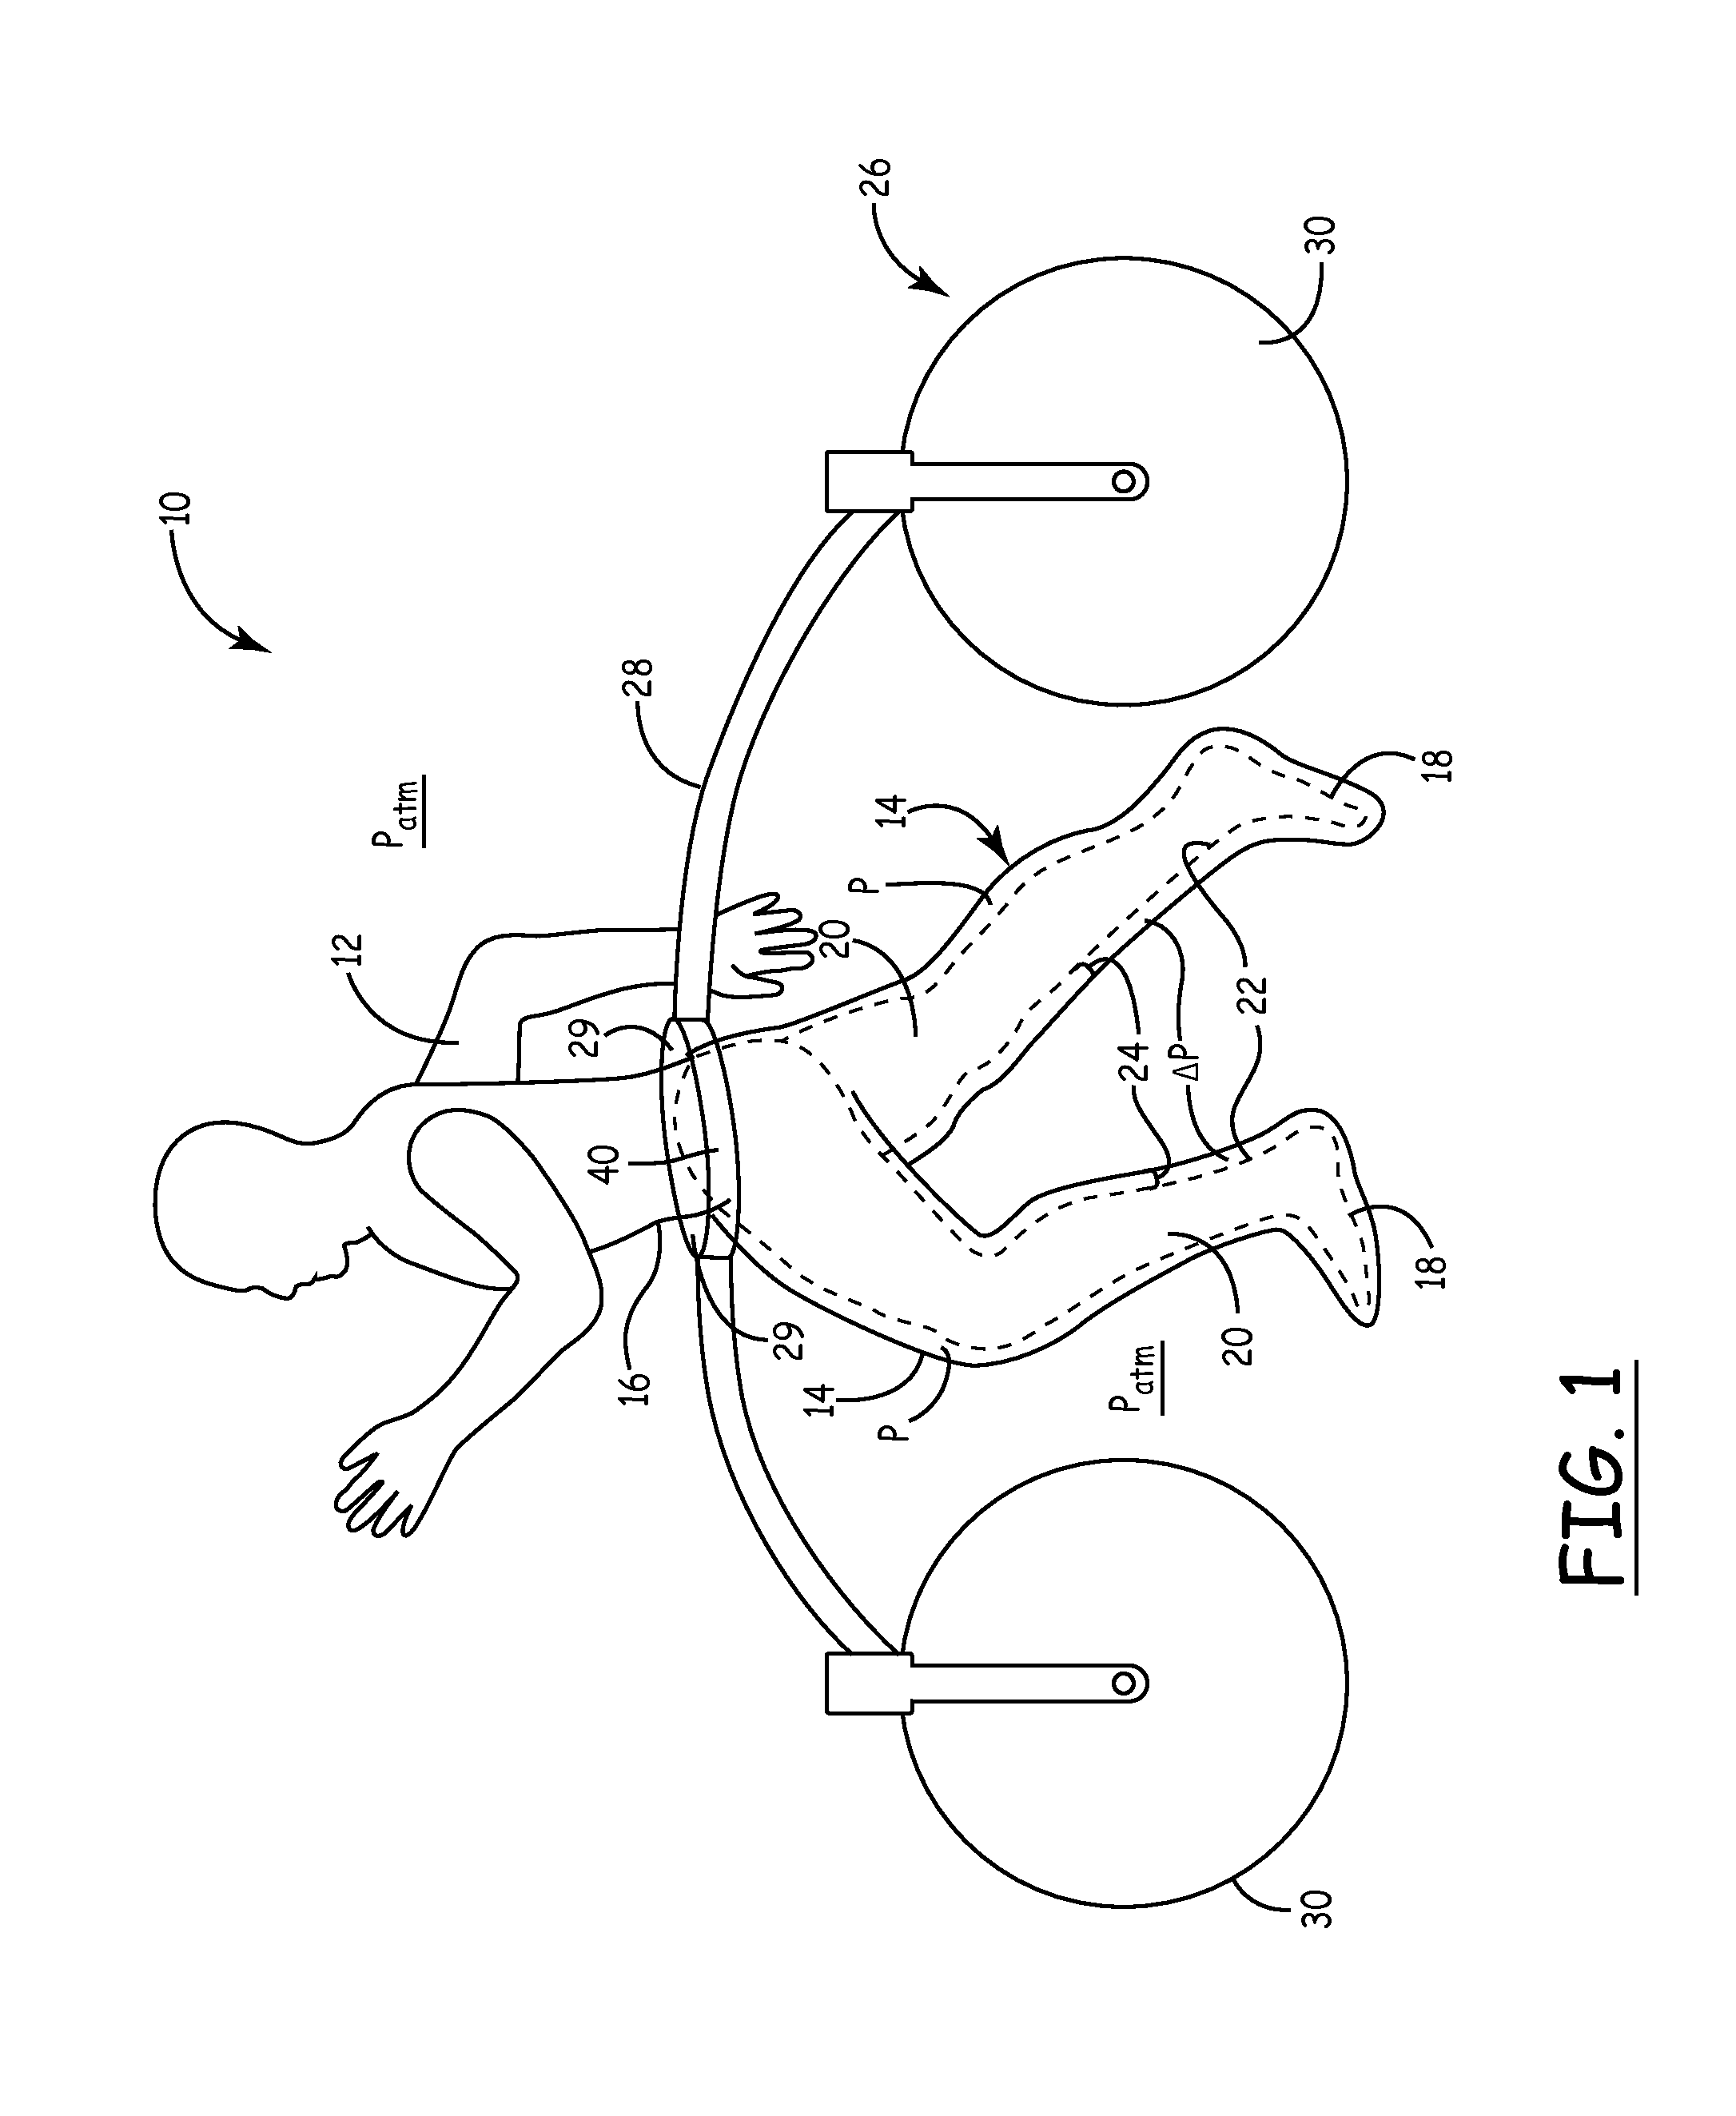 Suspension and Body Attachment System and Differential Pressure Suit for Body Weight Support Devices